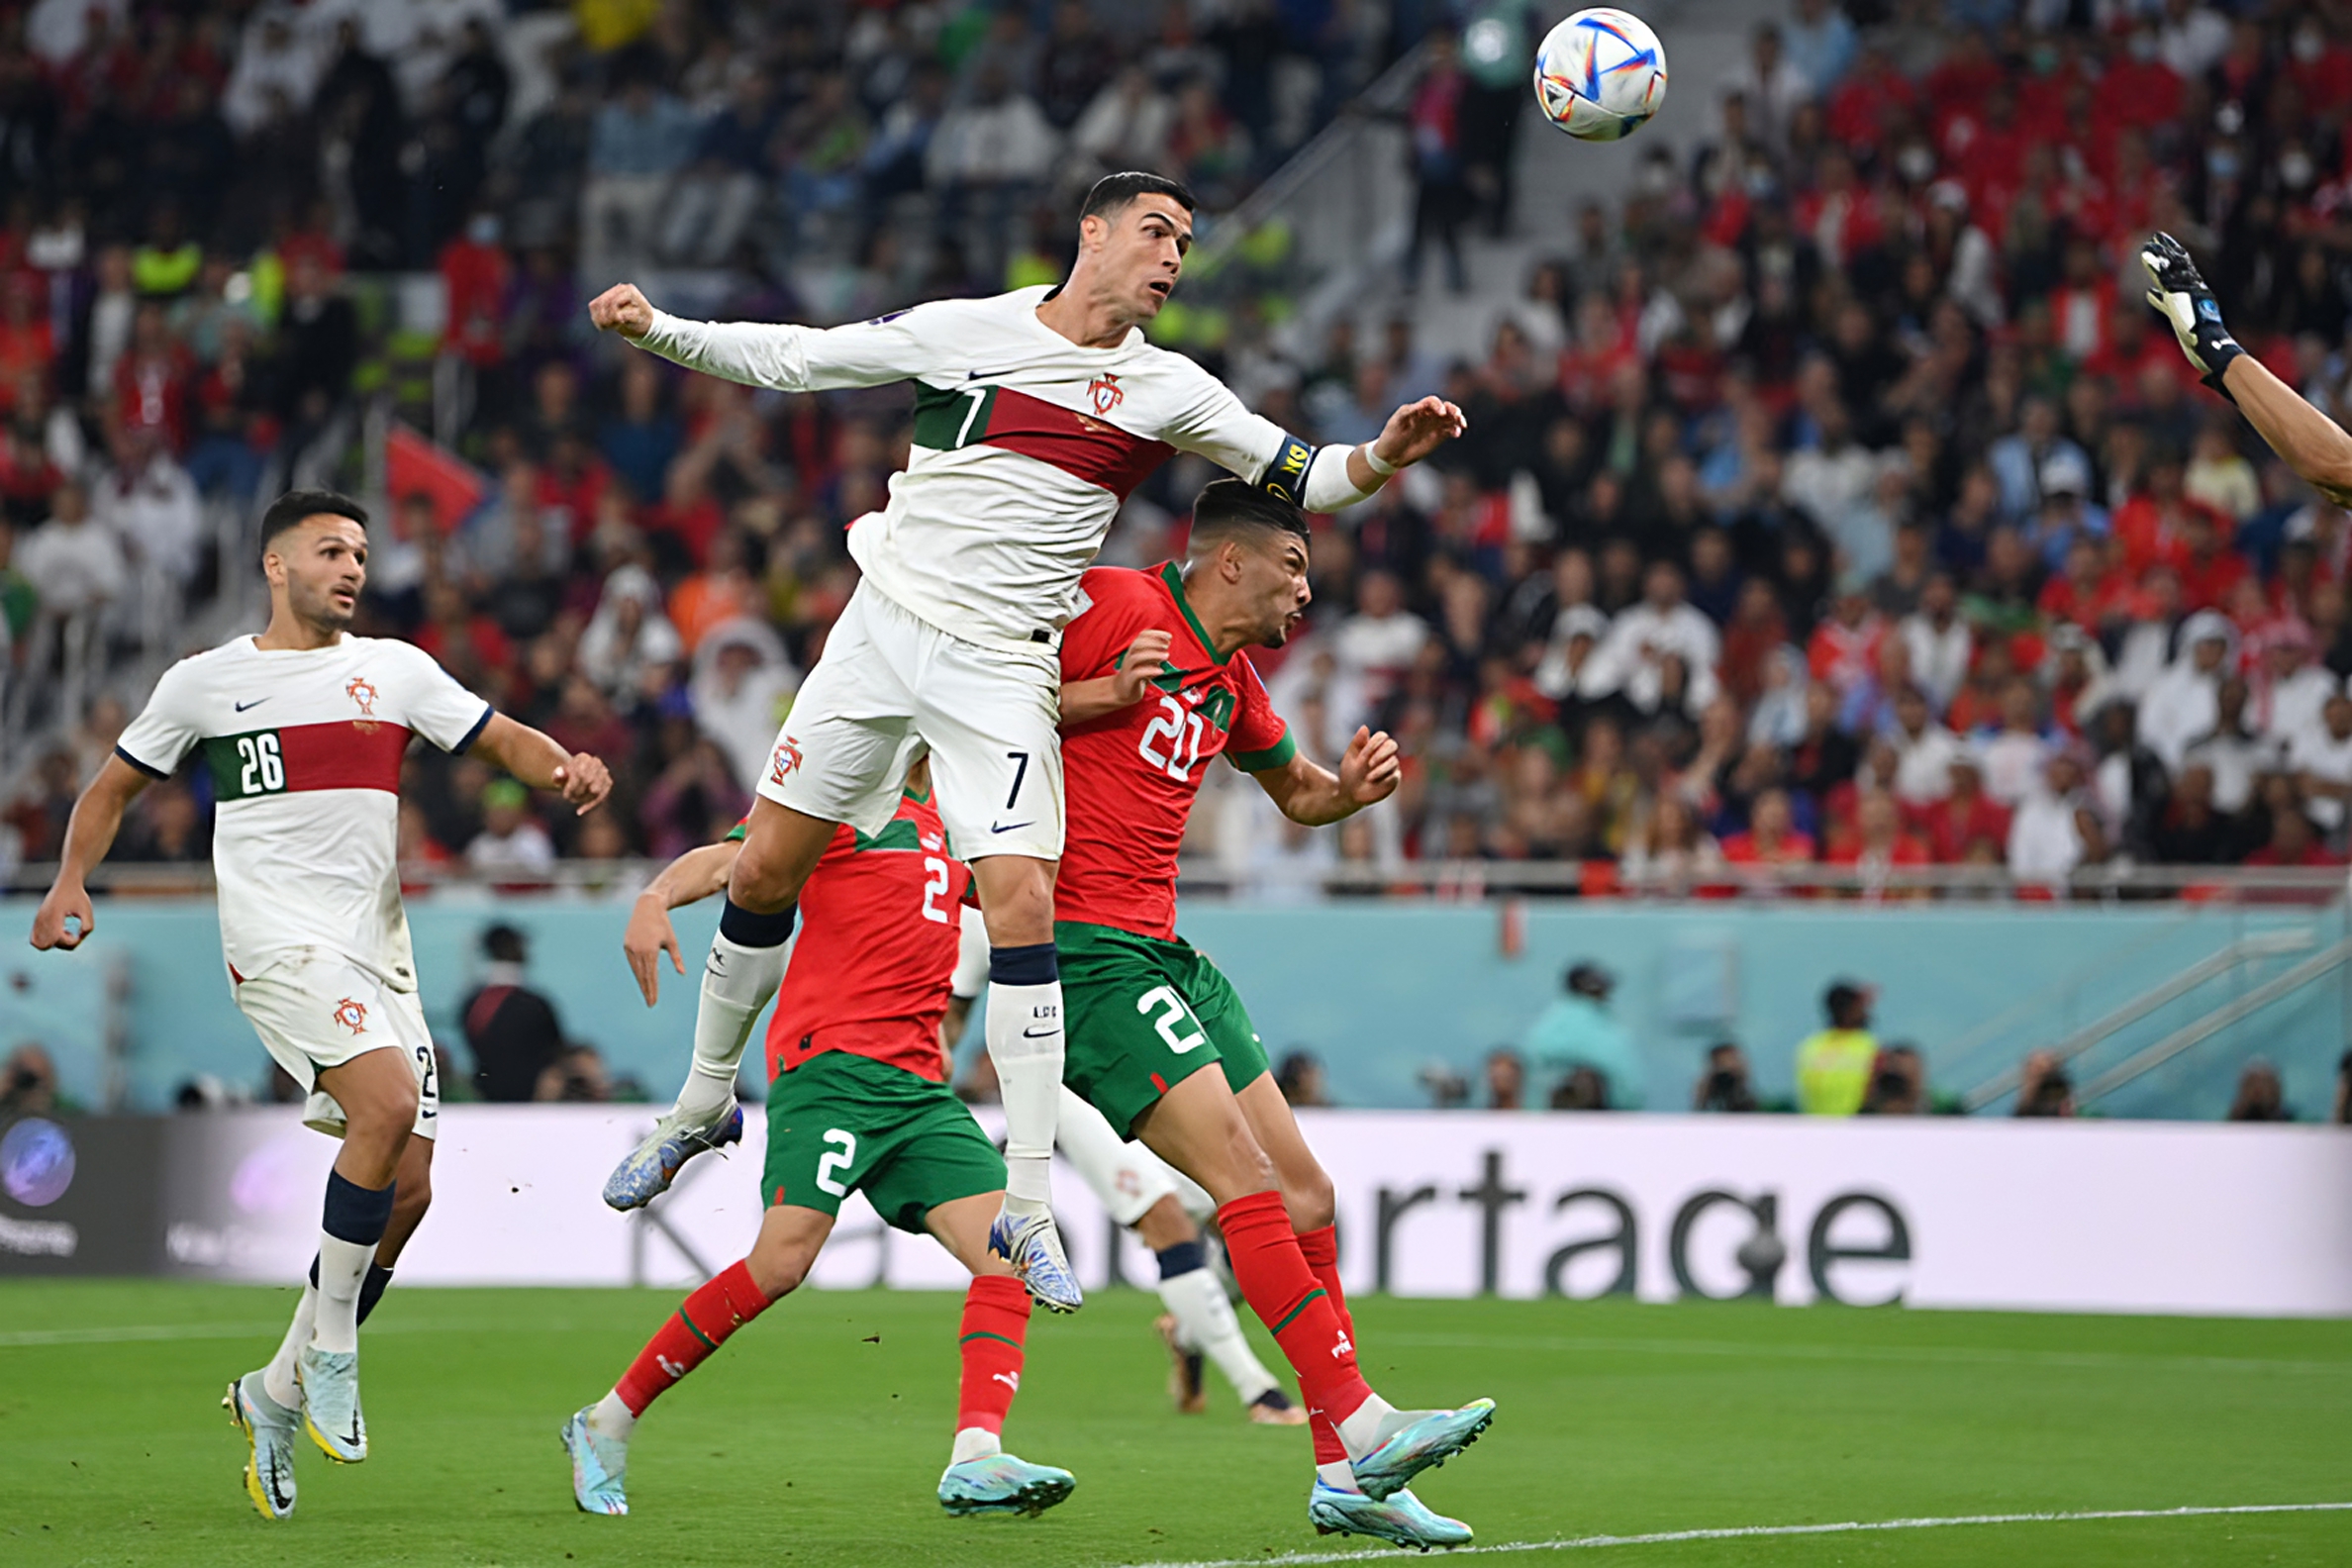 Cristiano Ronaldo is not a Chelsea striker target, pictured here heading a ball against Morocco in the Qatar World Cup